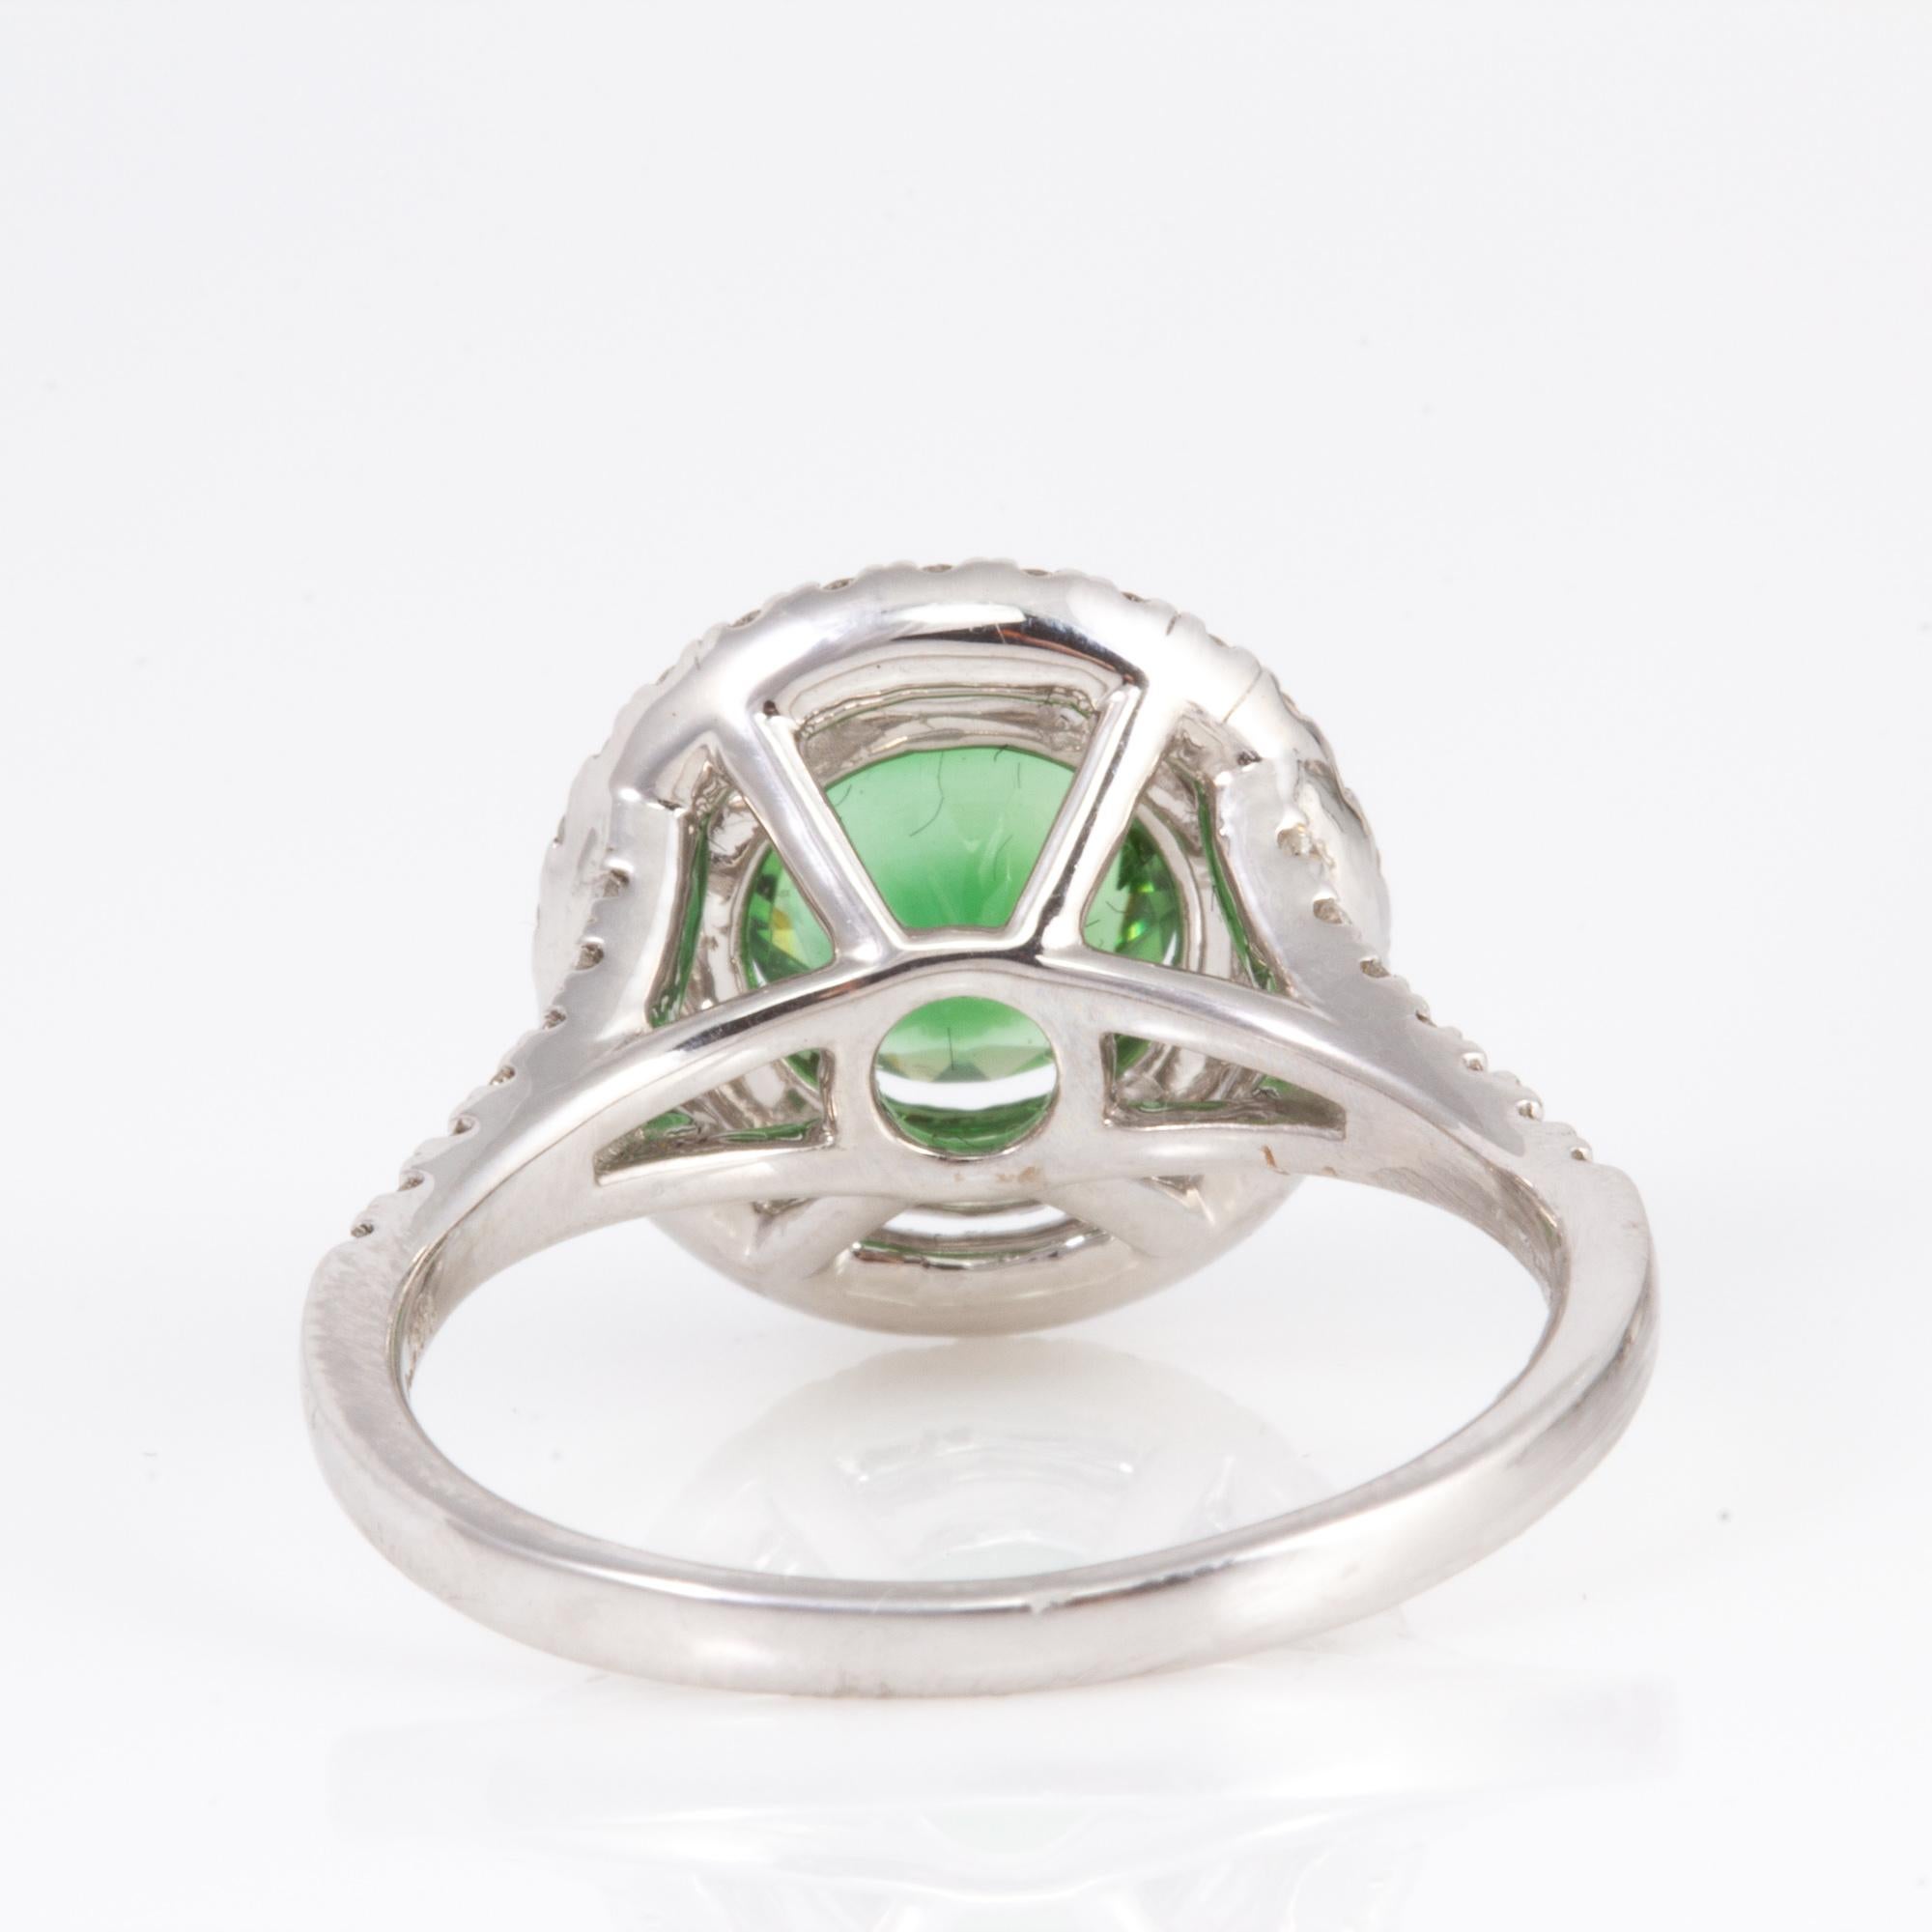 Exceptionally Well Cut 1.26 Carat Chrome Tourmaline and Diamond Ring For Sale 1